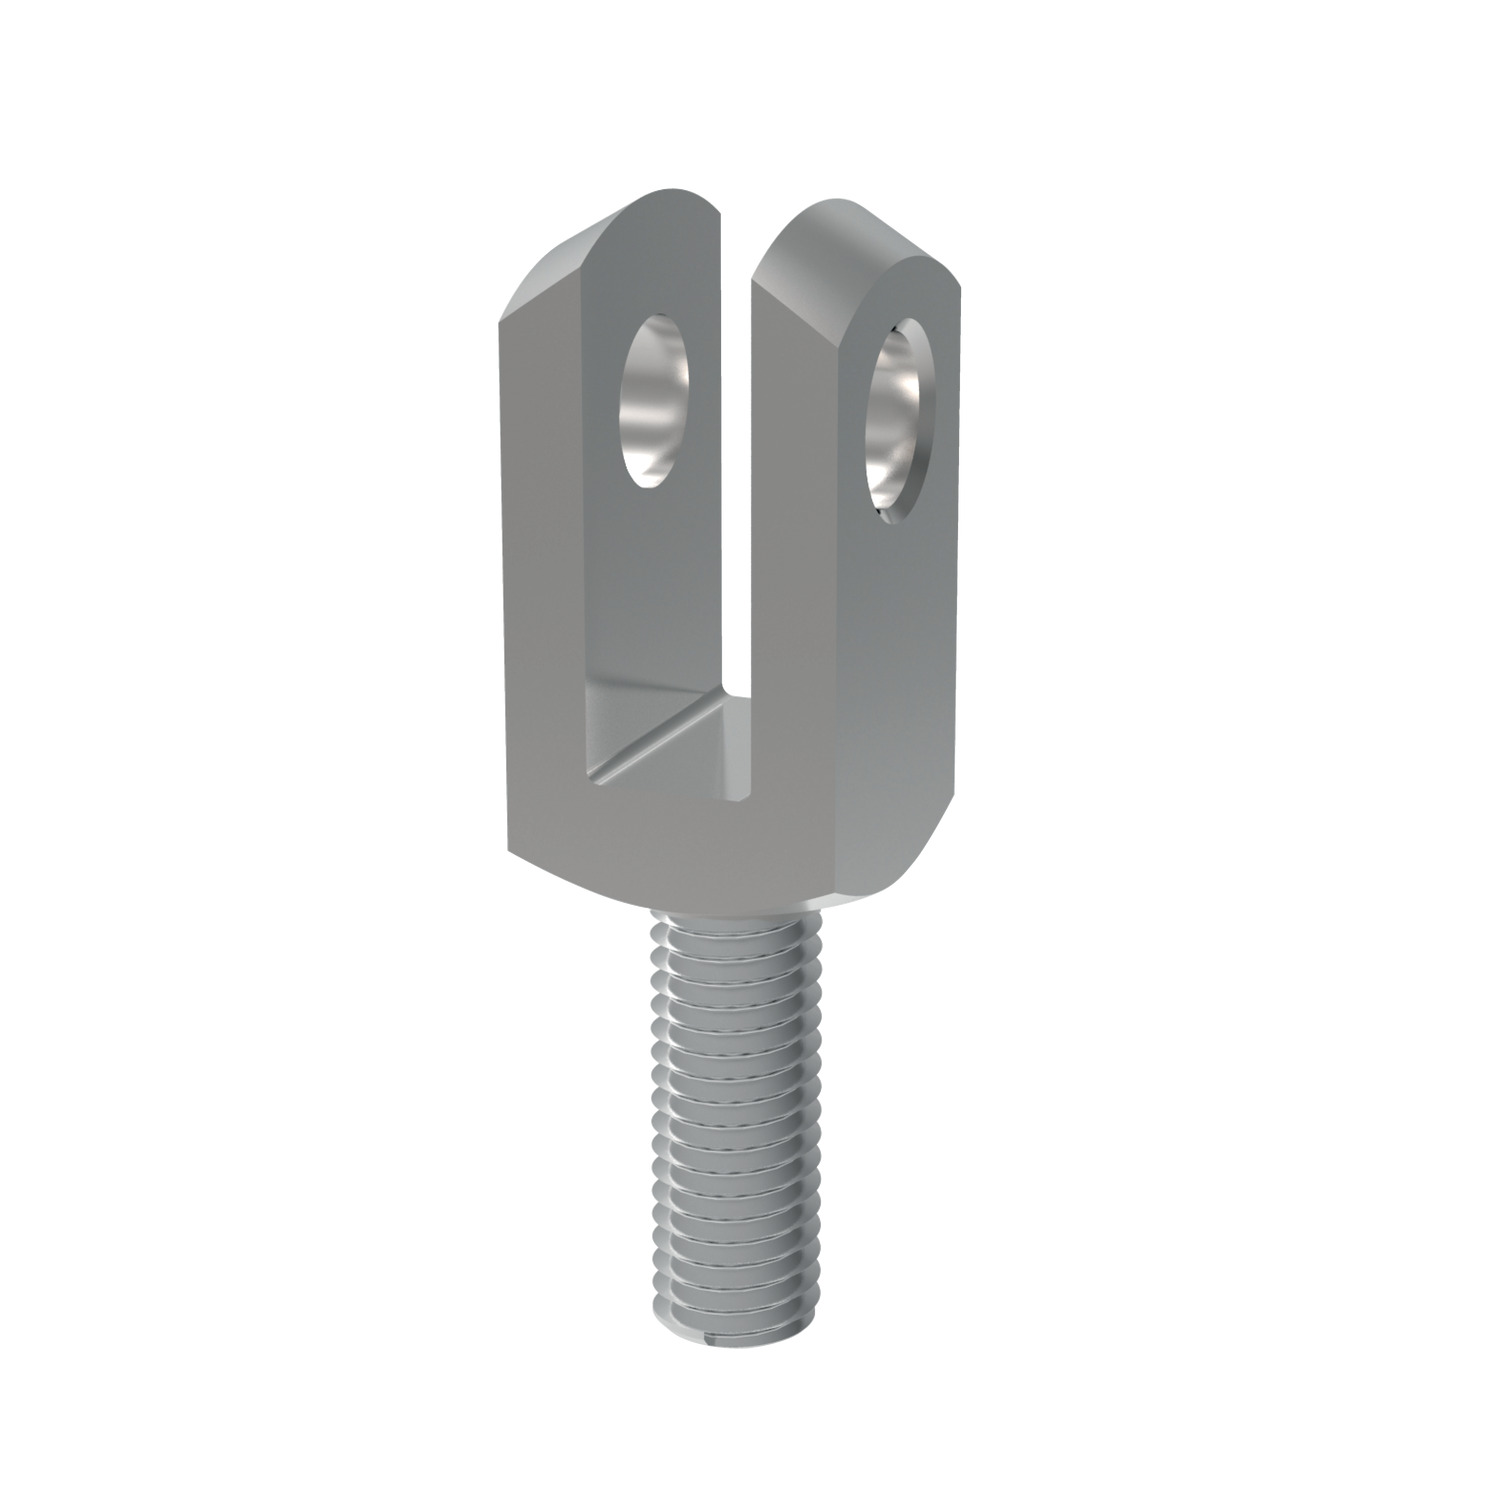 65640.W0006 Male Clevis Joints - Zinc plated steel. 6x12 - Right - 6 - 12